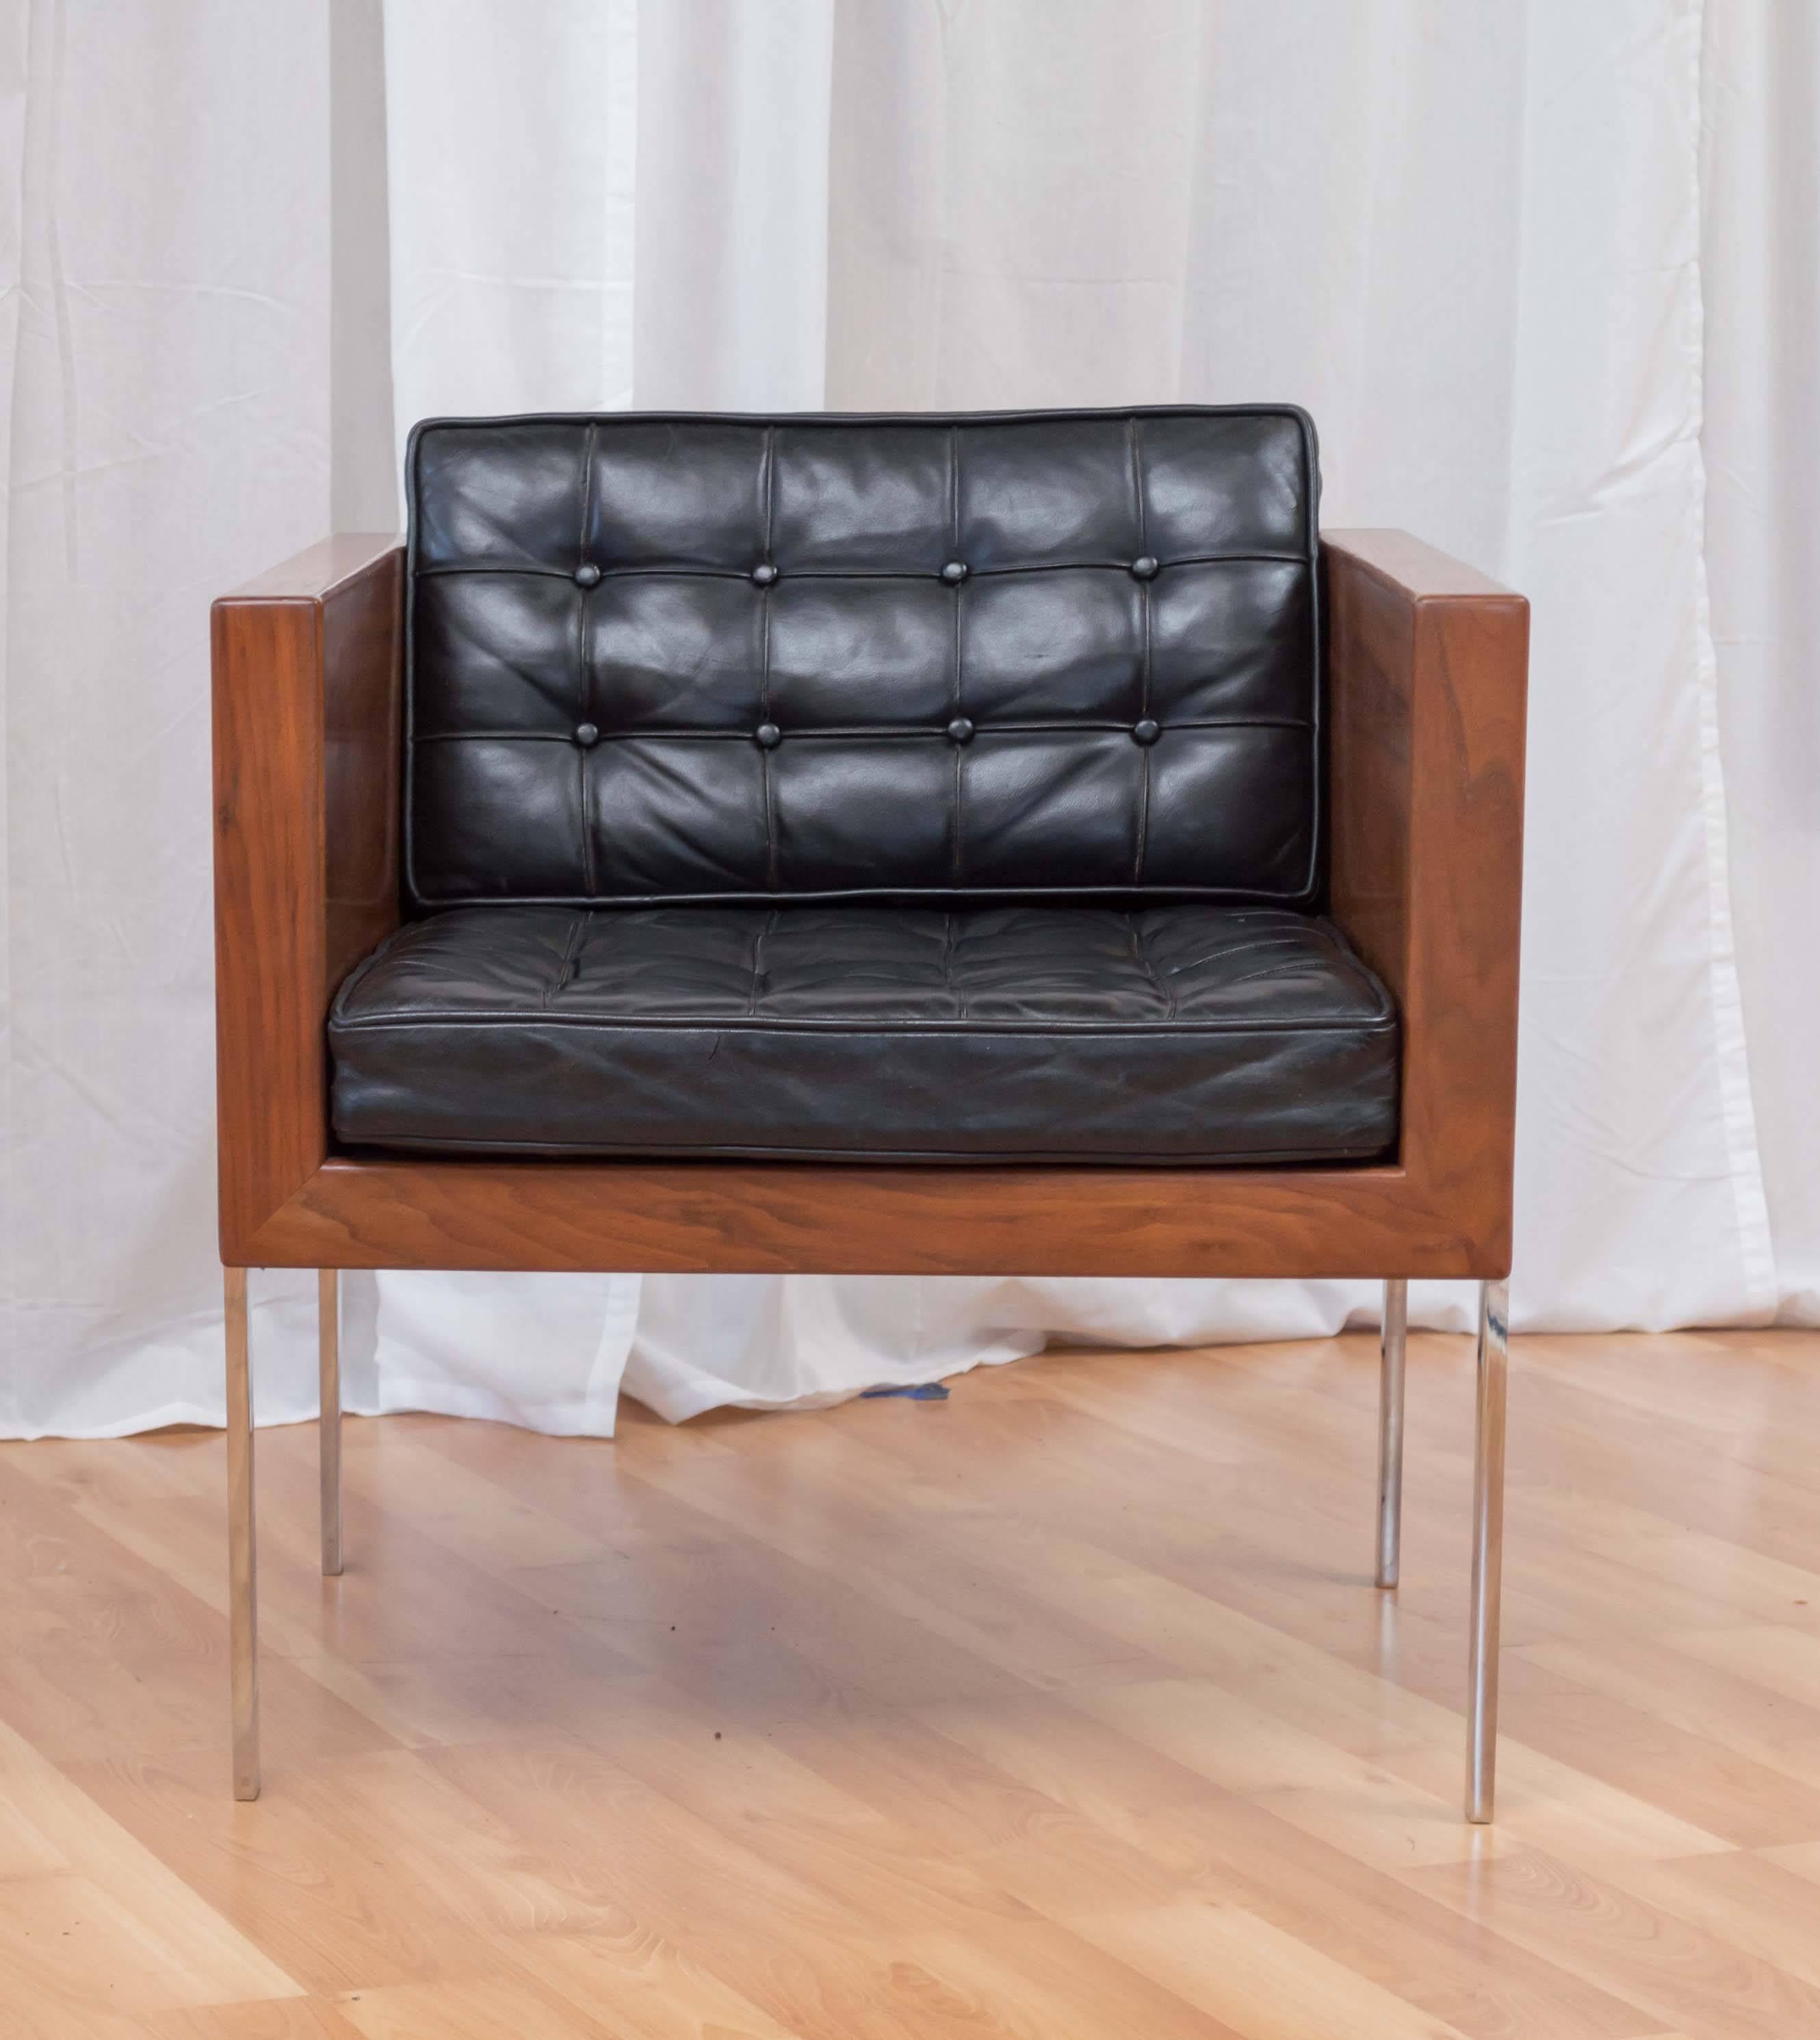 A walnut, leather, and polished stainless steel “Architectural Series - Model 248” cube chair by Harvey Probber.

This fantastic and deceptively comfortable chair has a wraparound walnut frame that’s been professionally refinished, and features